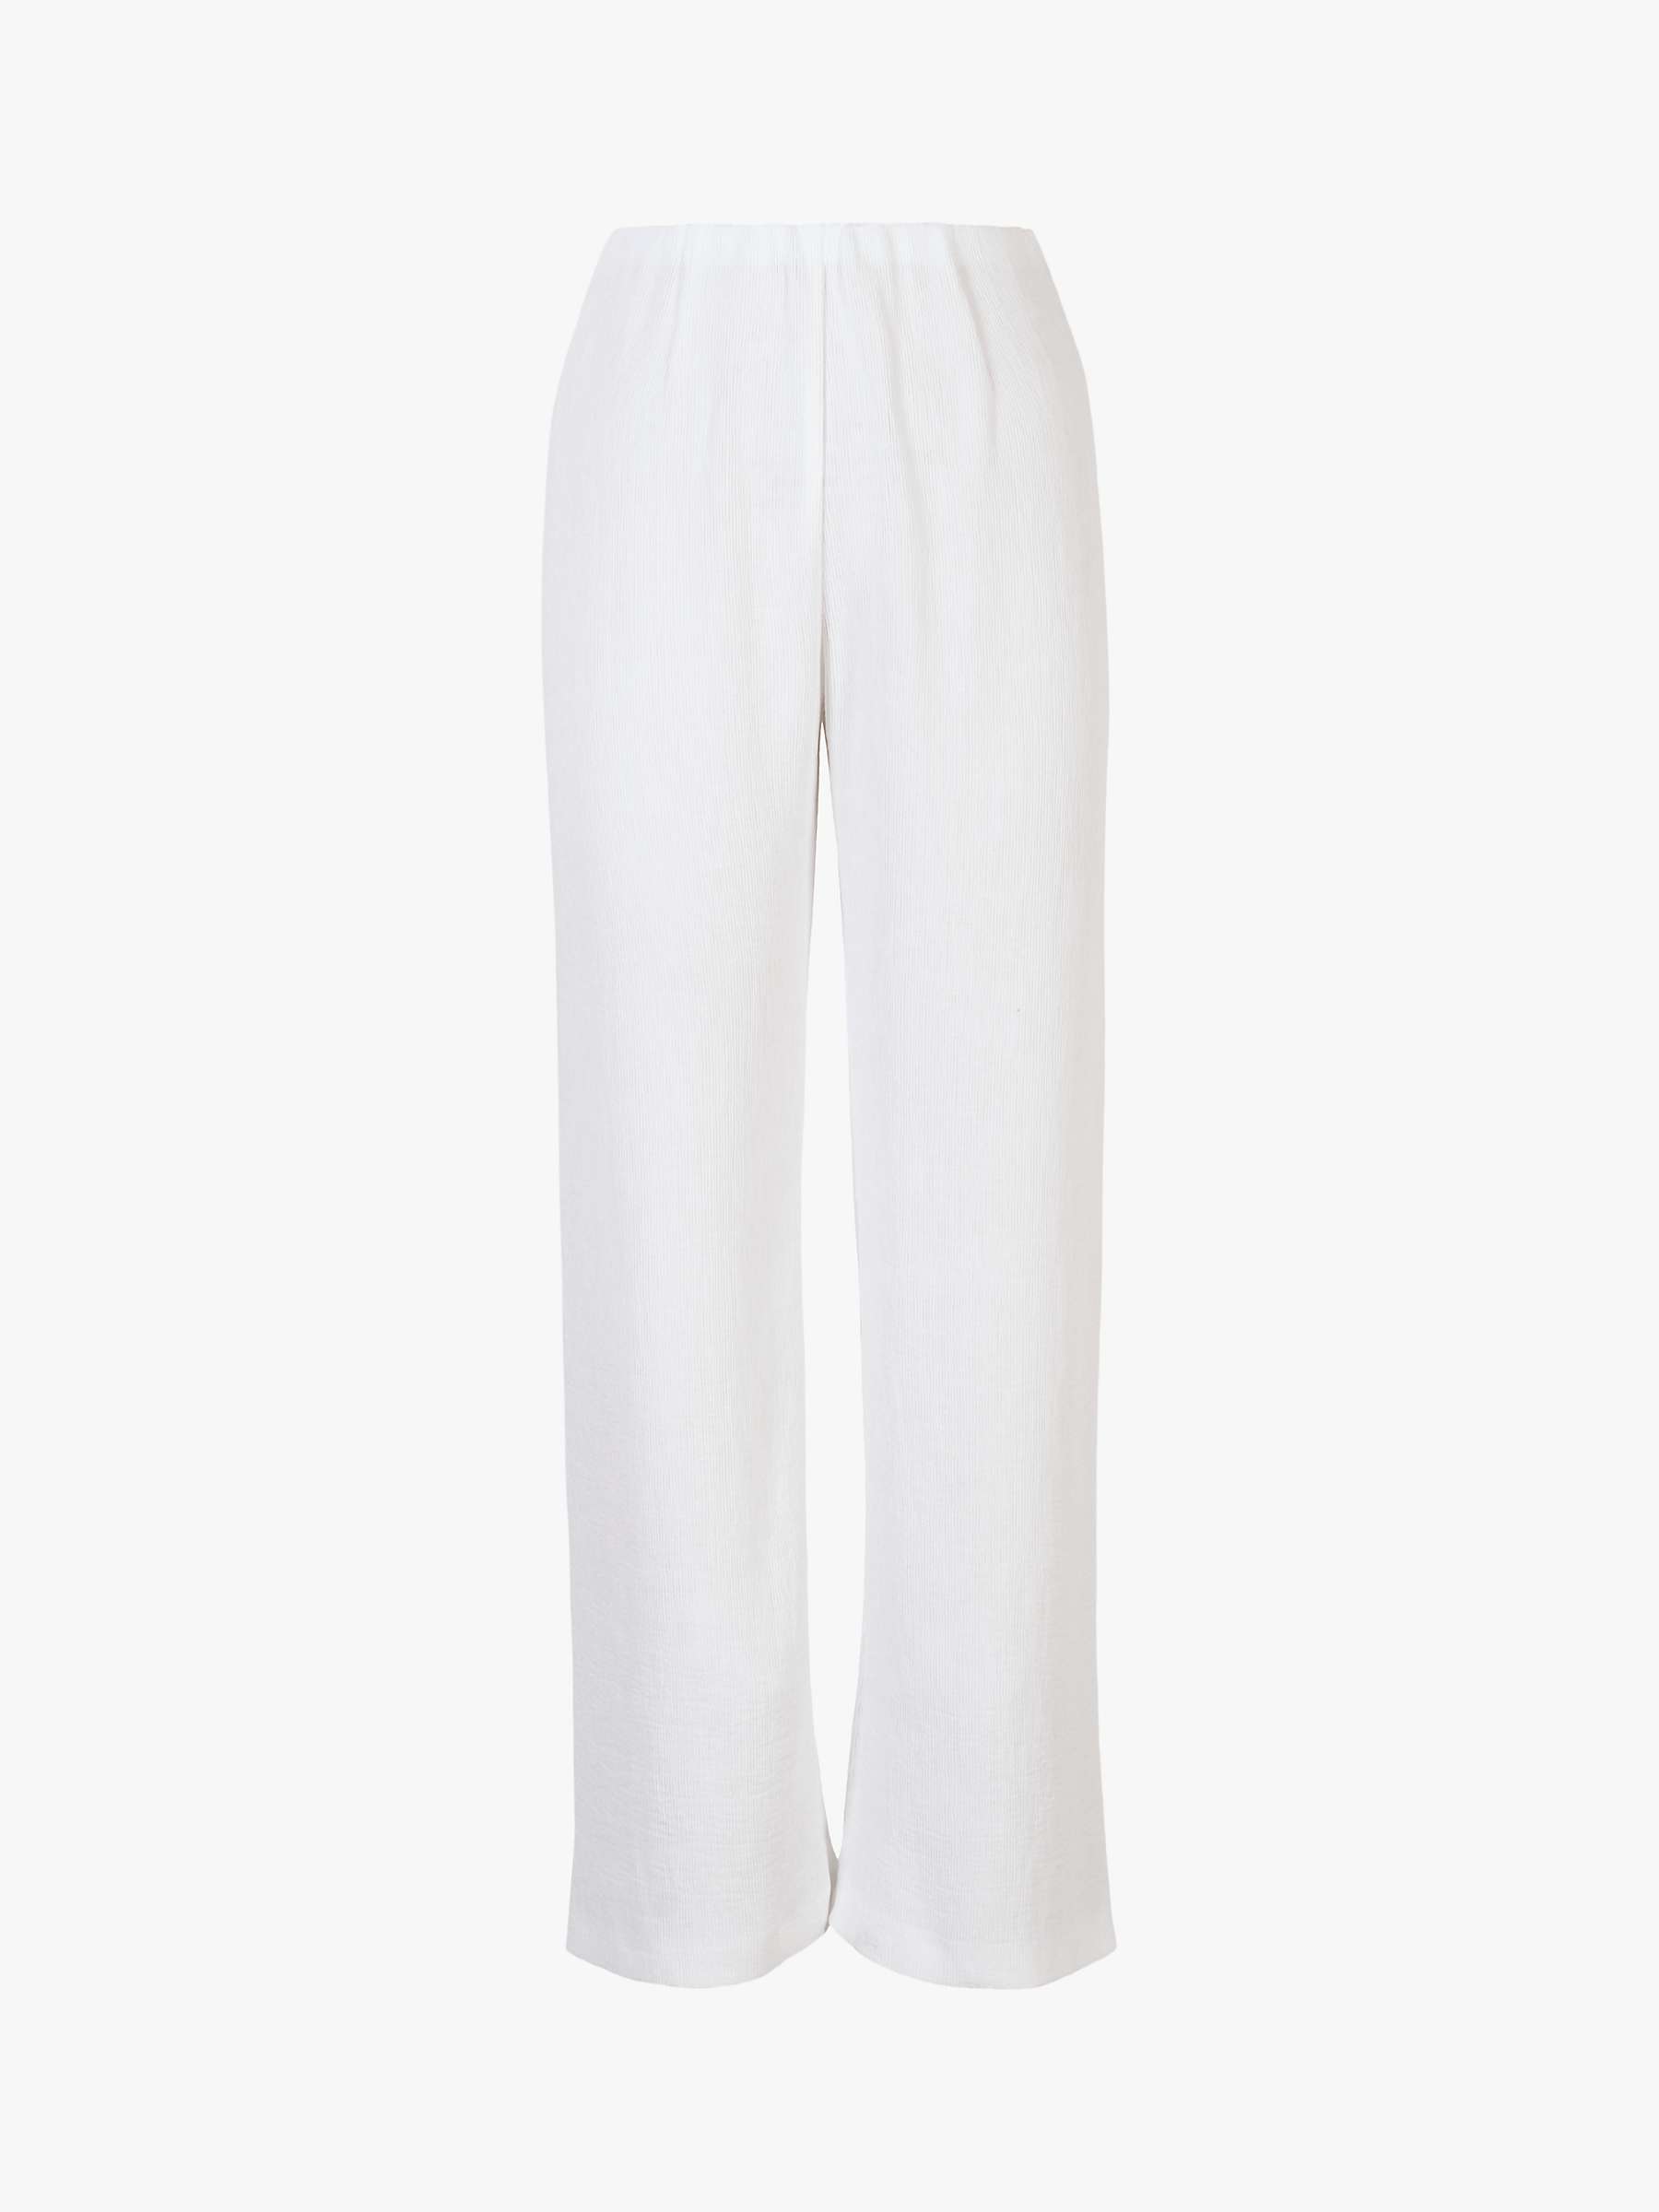 chesca Fine Crinkle Trousers, White at John Lewis & Partners